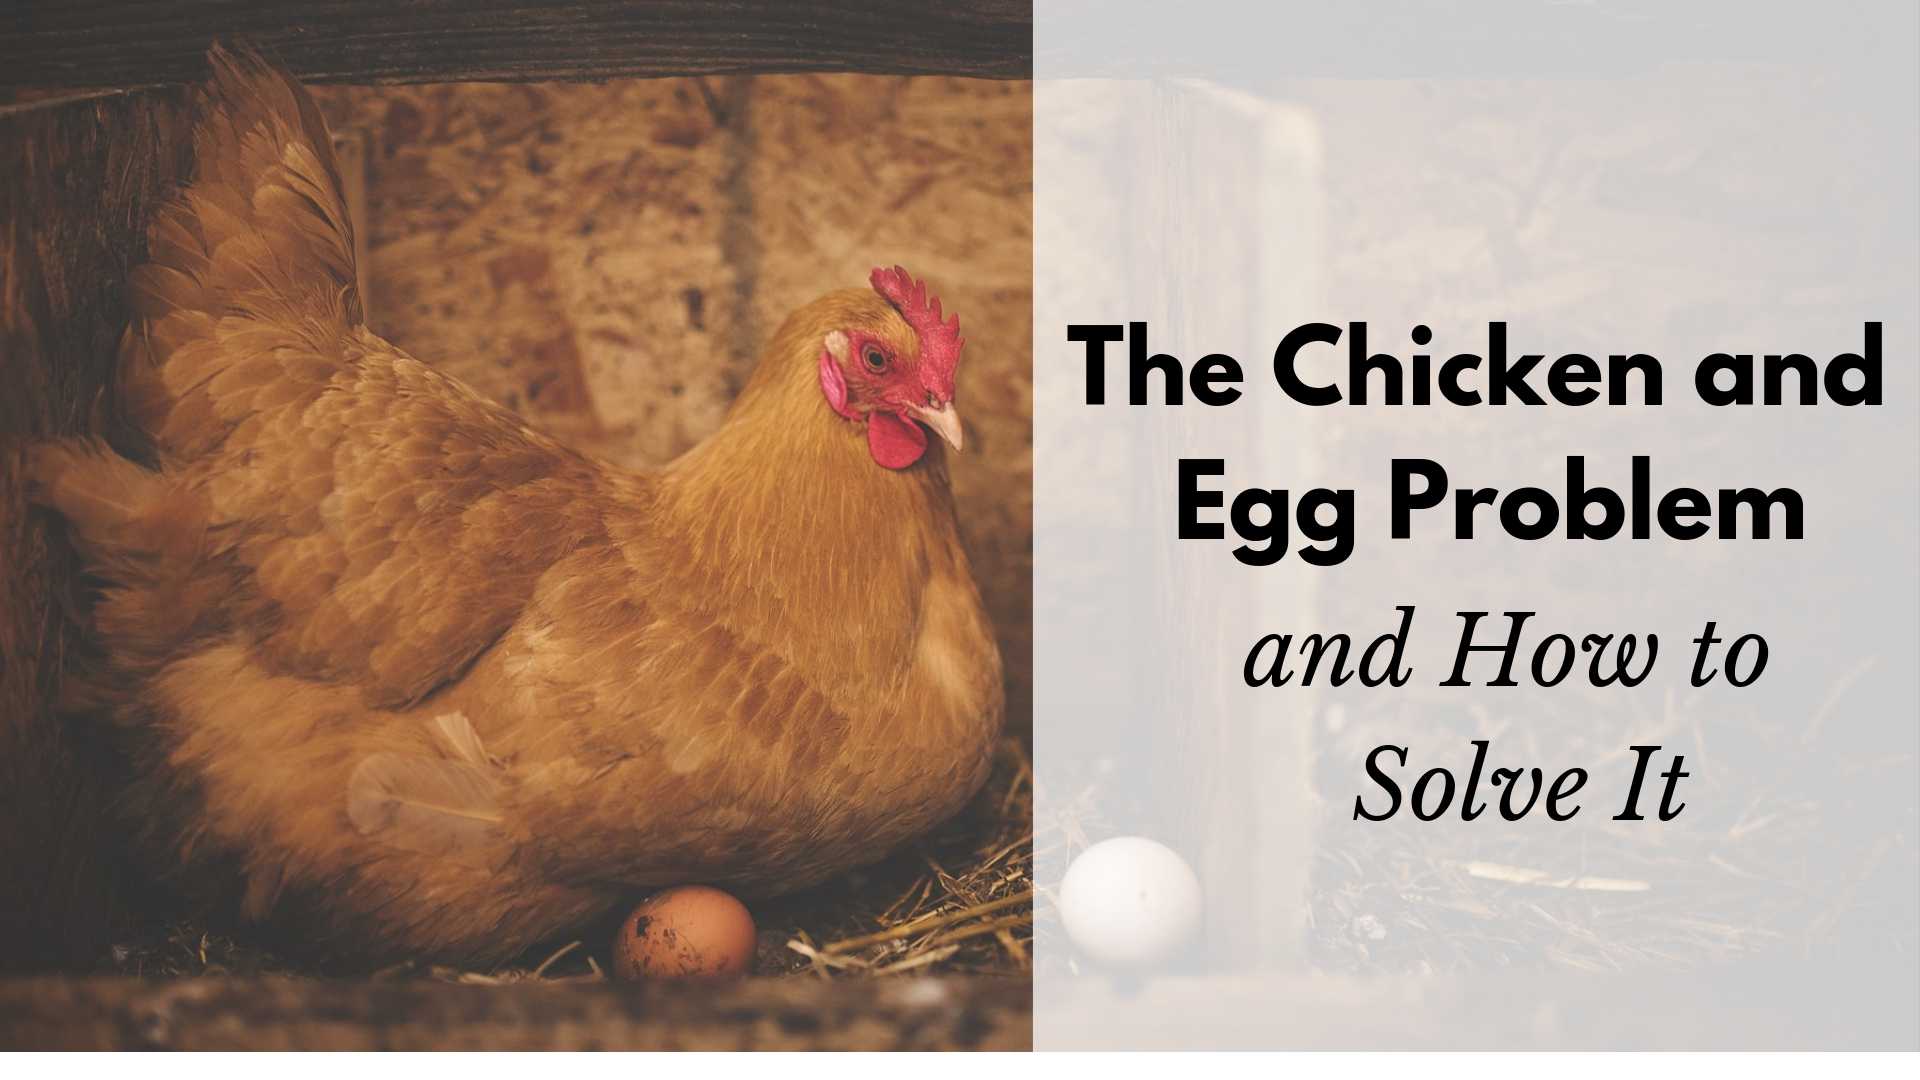 The Chicken and Egg Problem and How to Solve It